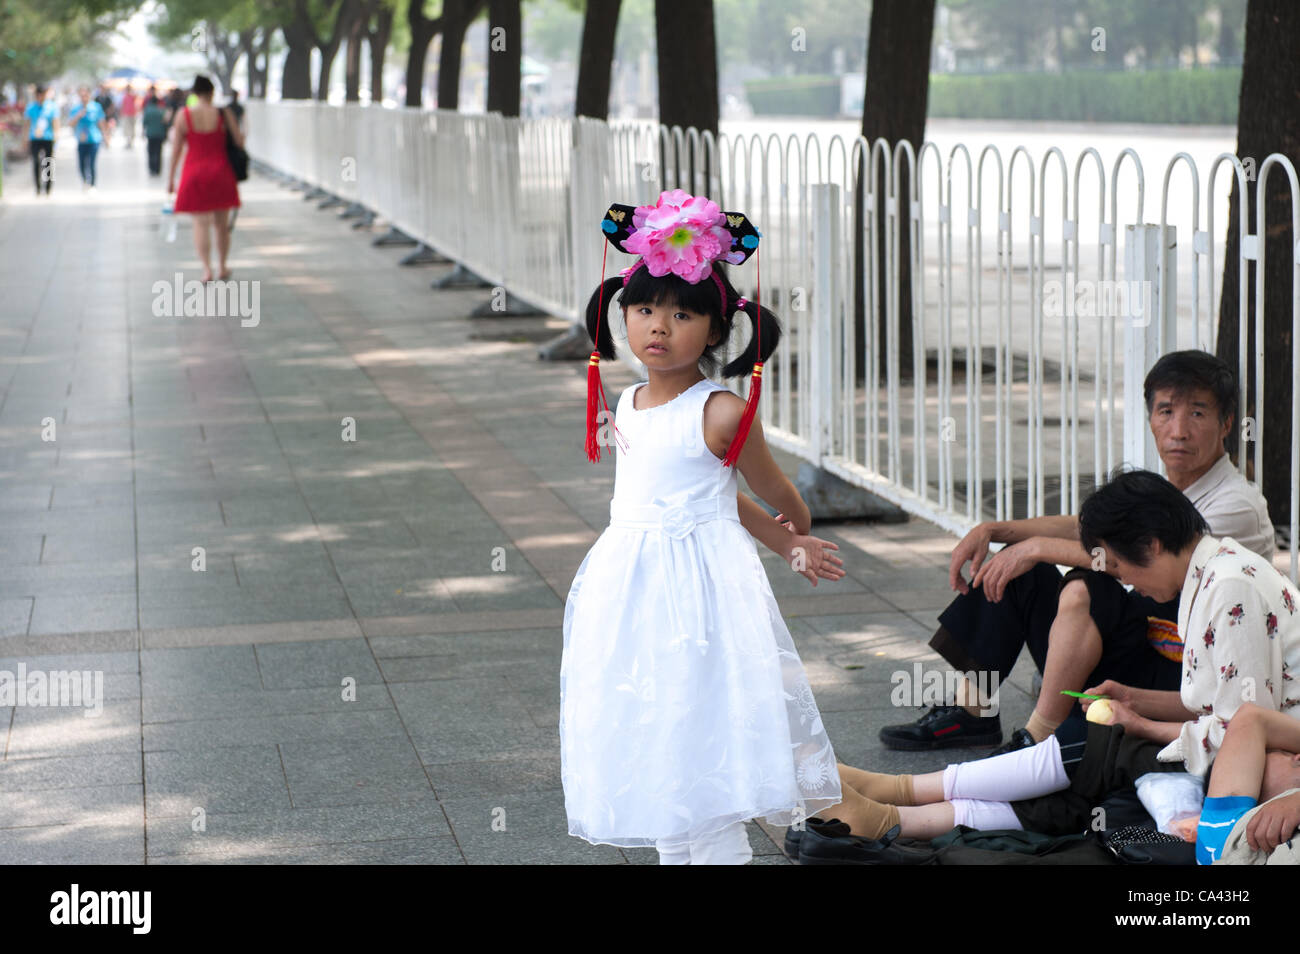 Girl wearing traditional clothes visiting Tiananmen Square with her family, Beijing, China on Monday June 4, 2012. June 4th 2012 marks the 23rd anniversary of the military crackdown on students protests at Tiananmen Square in 1989. Stock Photo